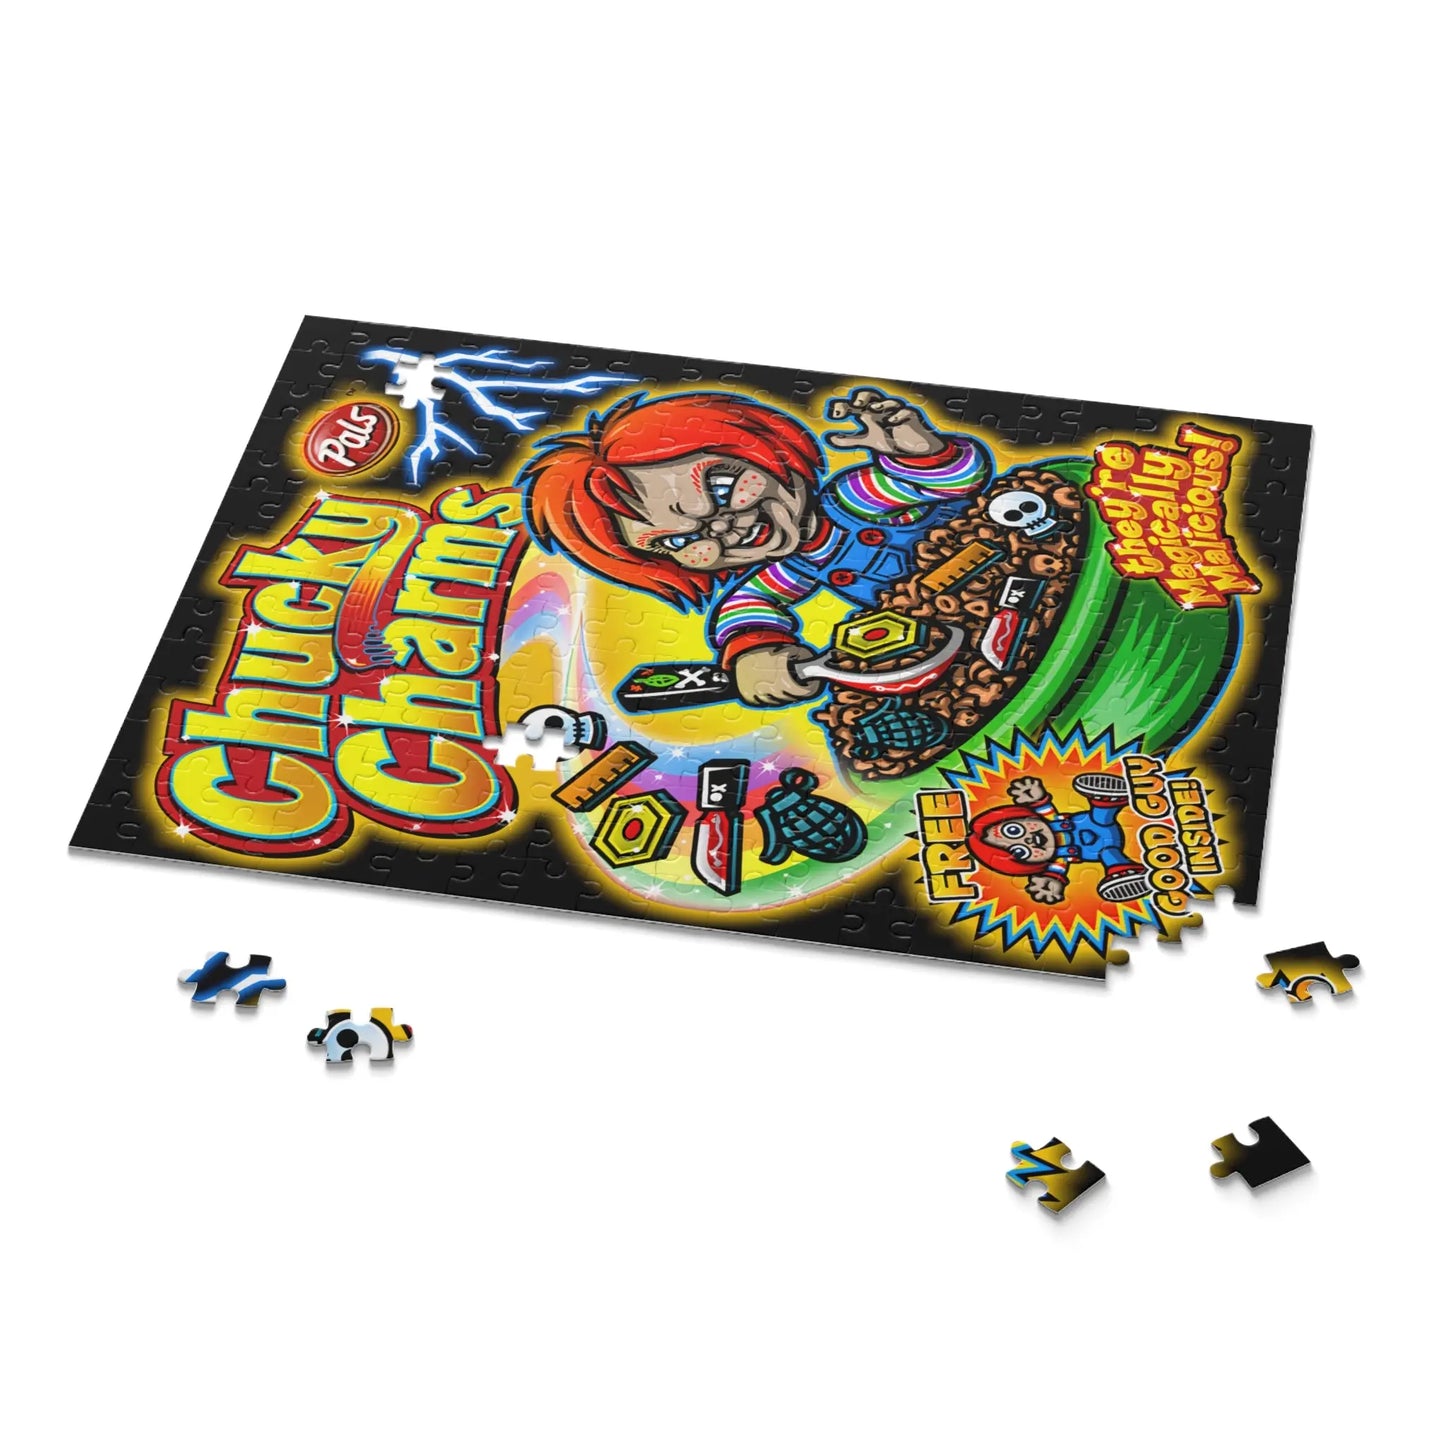 Child’s Play Chucky Puzzle Chucky Charms horror movie gifts jigsaw puzzle - papercraneco